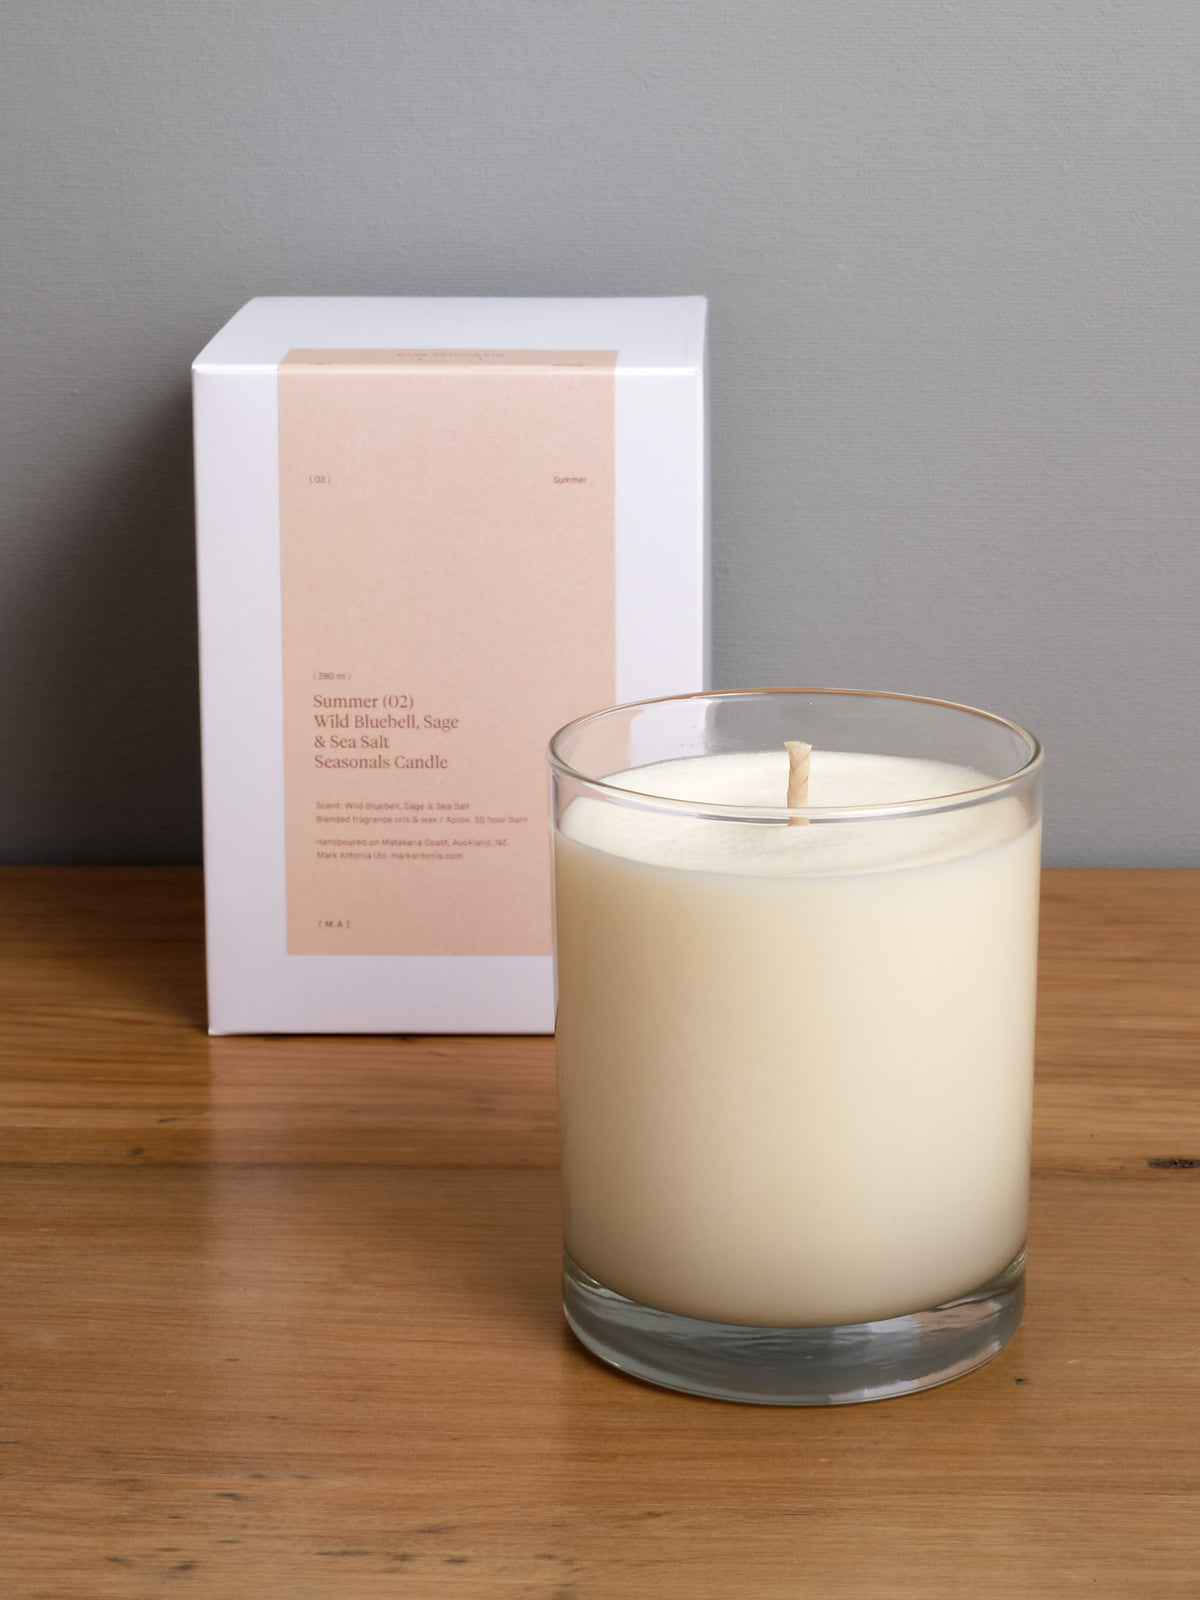 A Mark Antonia Seasonal Candle (2.0) - Summer sitting on a wooden table next to a box.